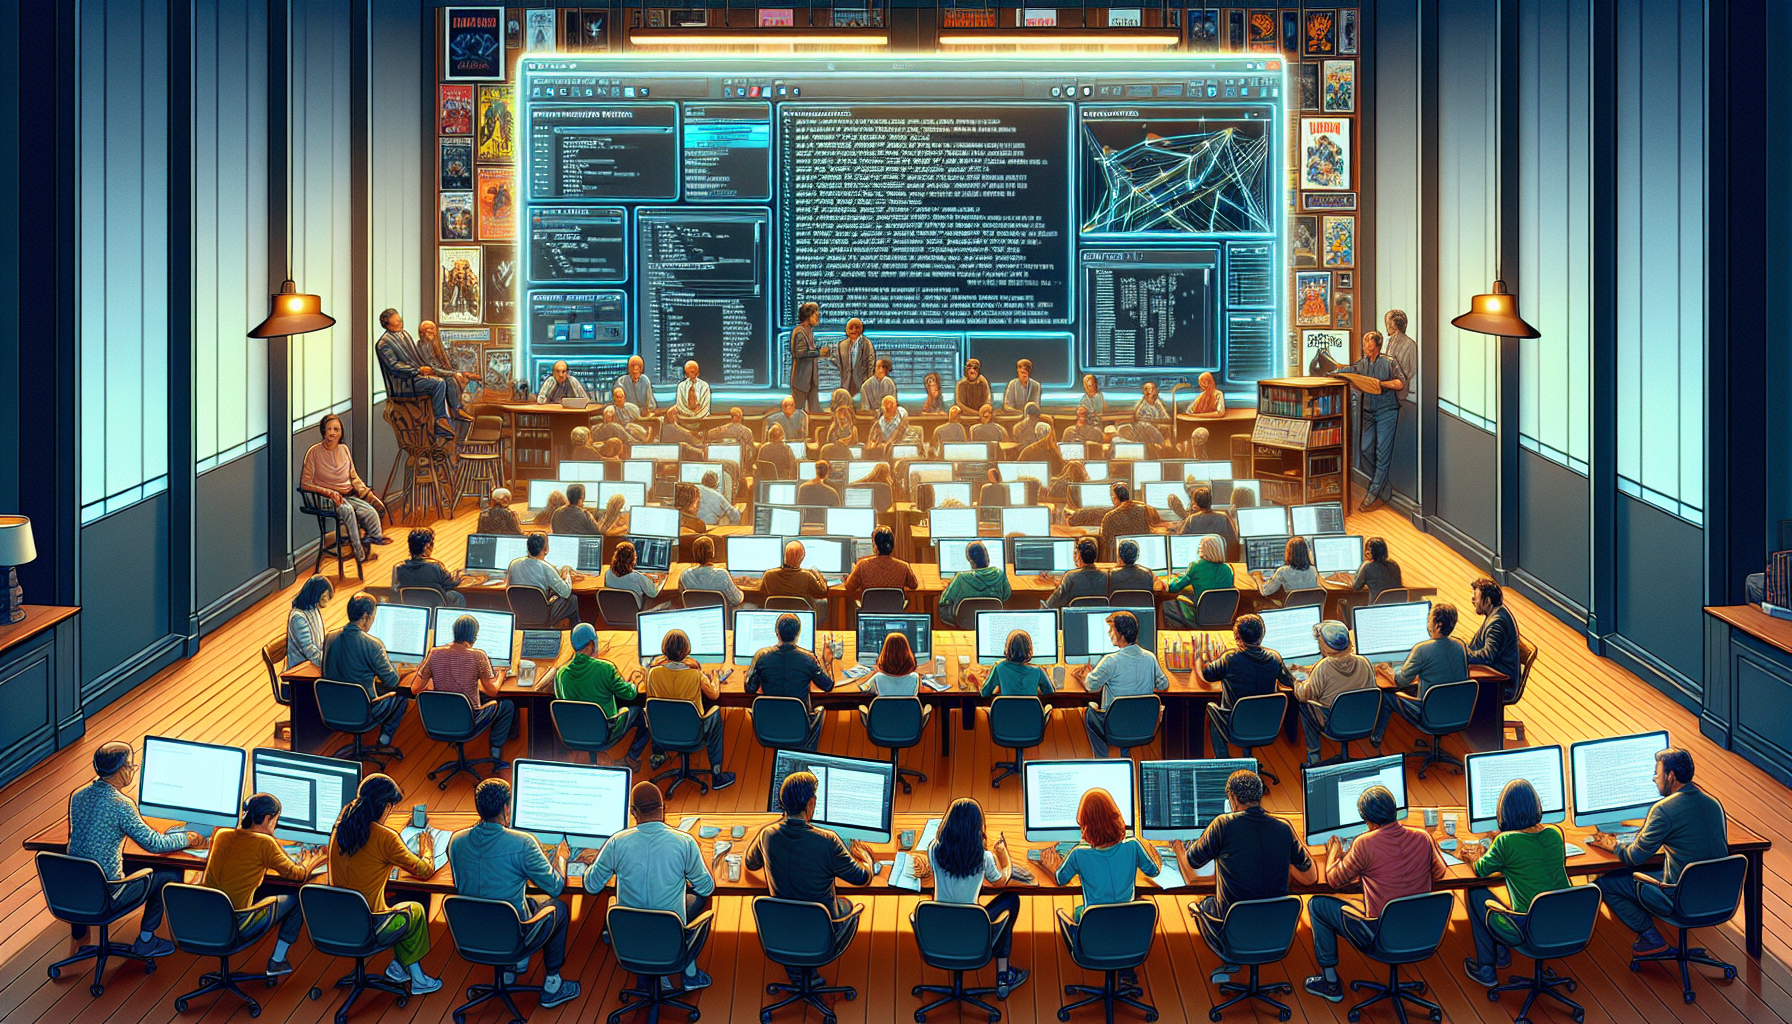 A digital art depiction of a diverse group of people, both young and old, gathered around a large, glowing computer screen in a cozy, well-lit writers room. The screen displays various open windows of